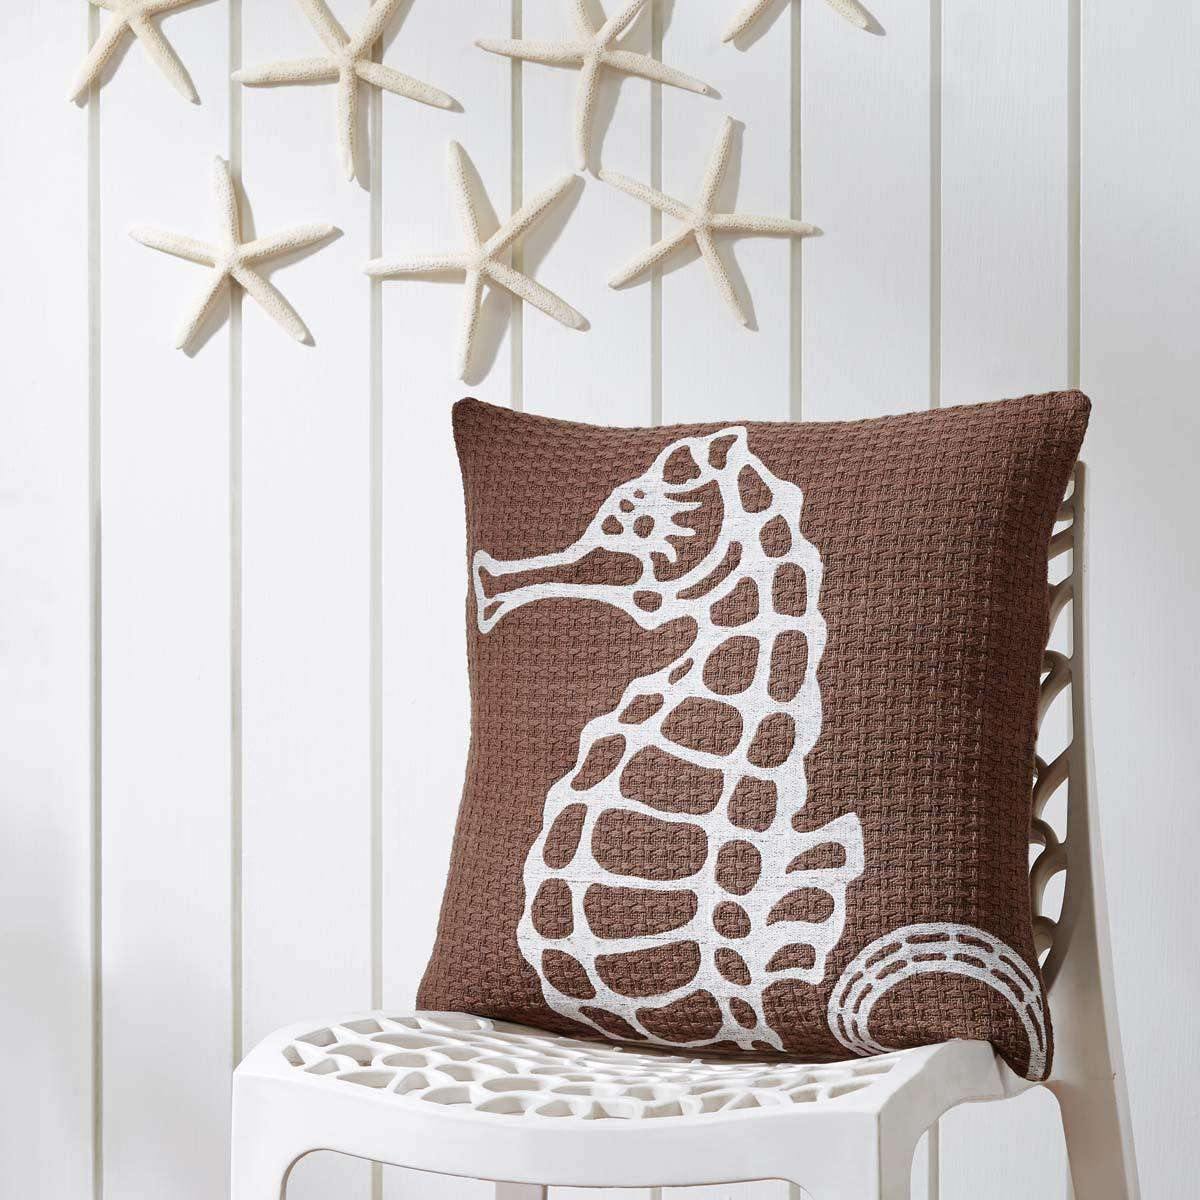 Embroidered Seahorse Pillow 18x18